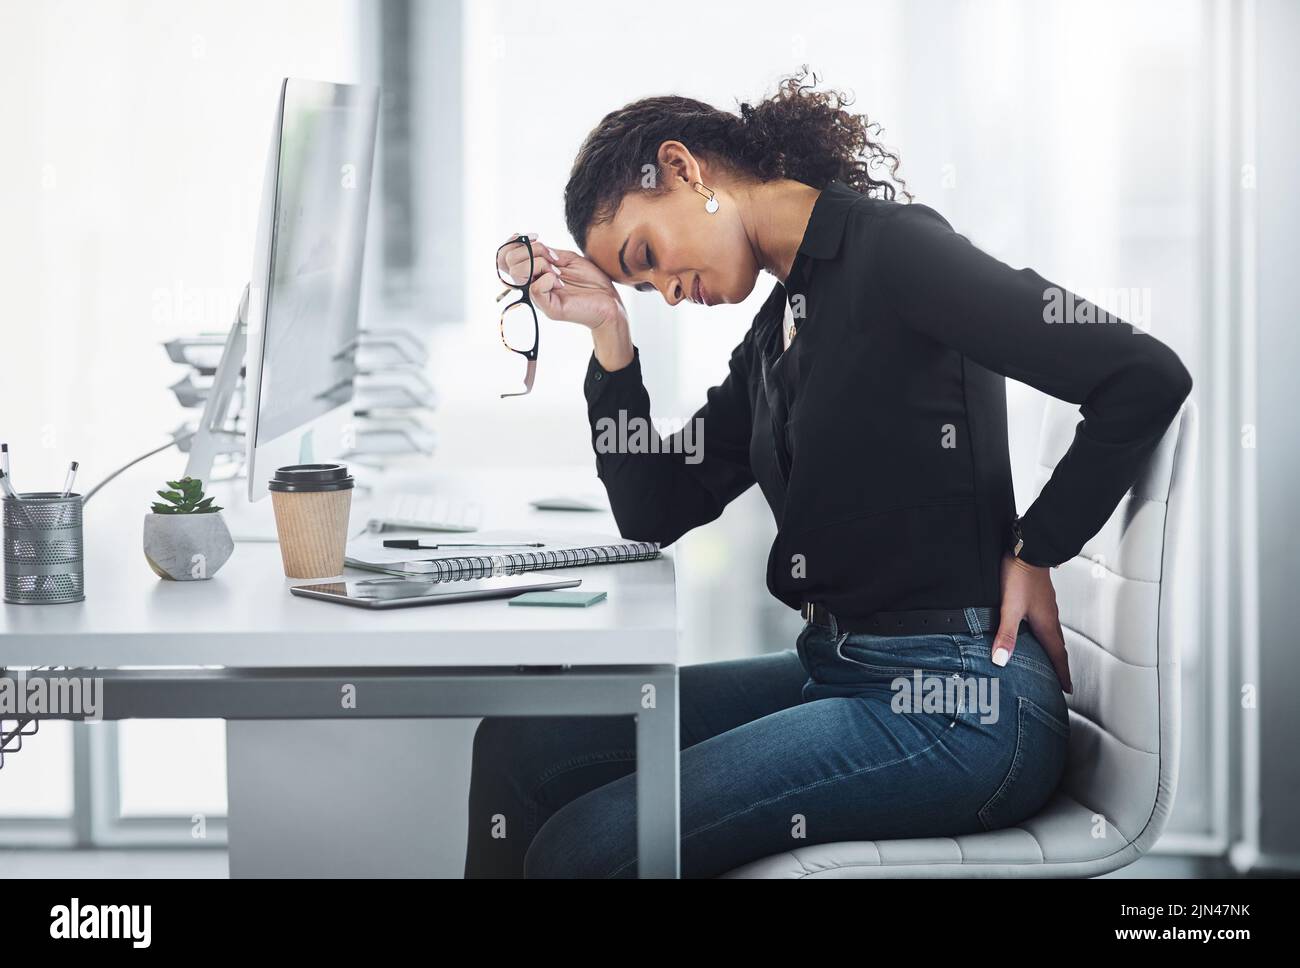 https://c8.alamy.com/comp/2JN47NK/my-back-pain-is-just-adding-to-my-stress-a-young-businesswoman-suffering-with-back-ache-in-an-office-2JN47NK.jpg